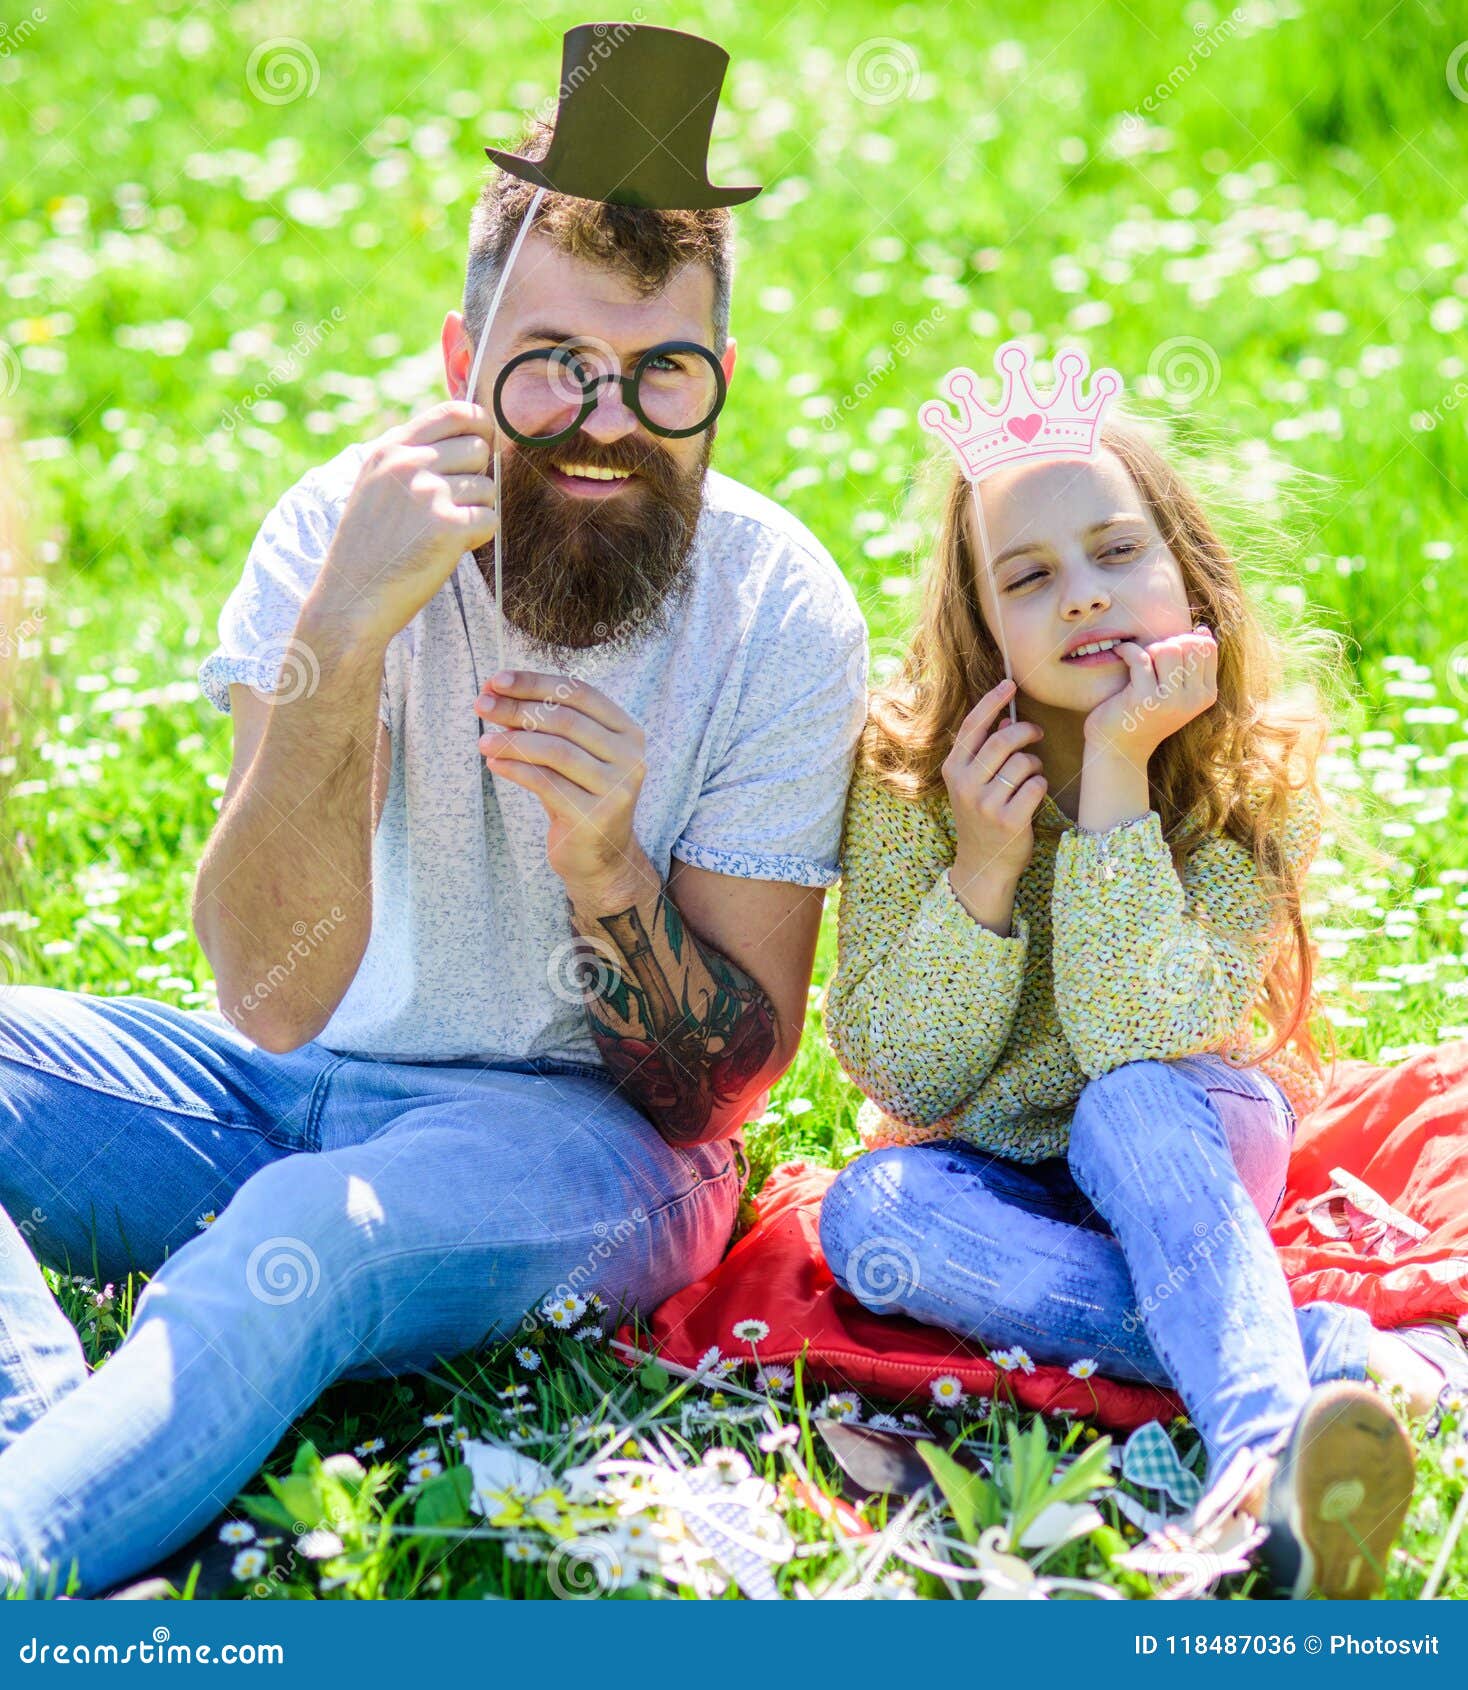 dad and daughter sits on grass at grassplot, green background. child and father posing with eyeglases, crown and top hat